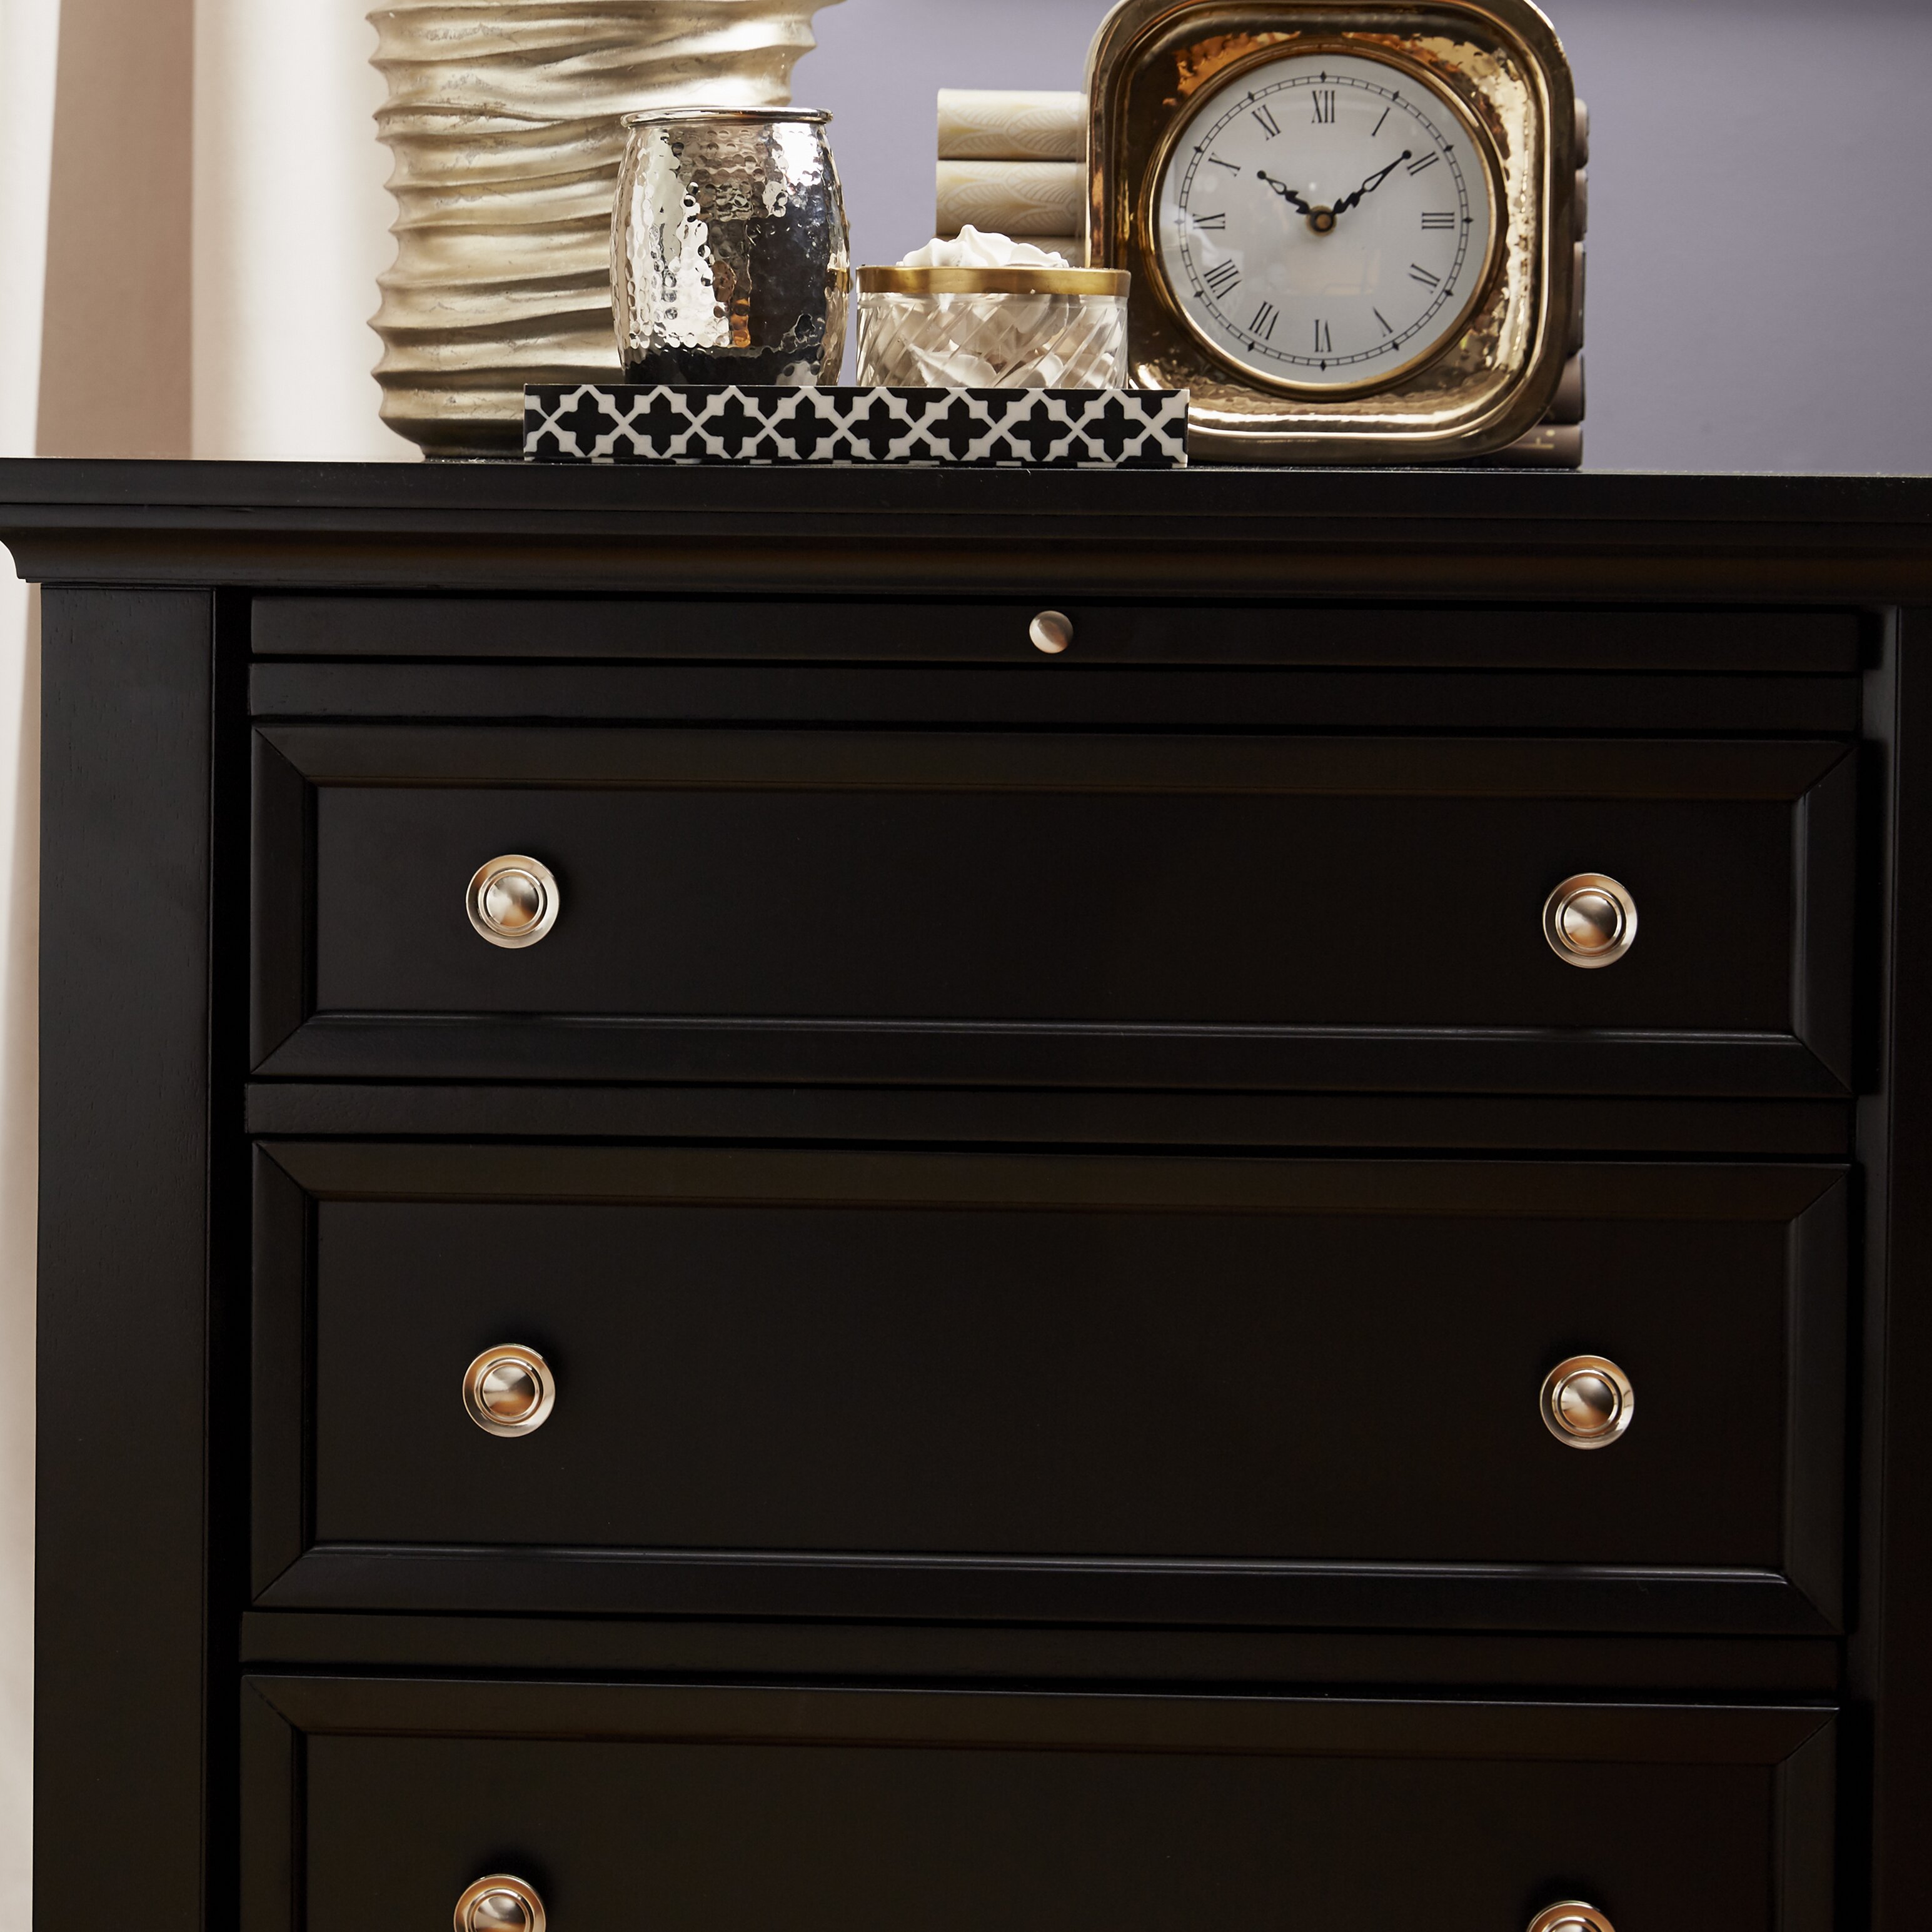 Darby Home Co Ellis 3 Drawer Bachelor's Chest & Reviews Wayfair